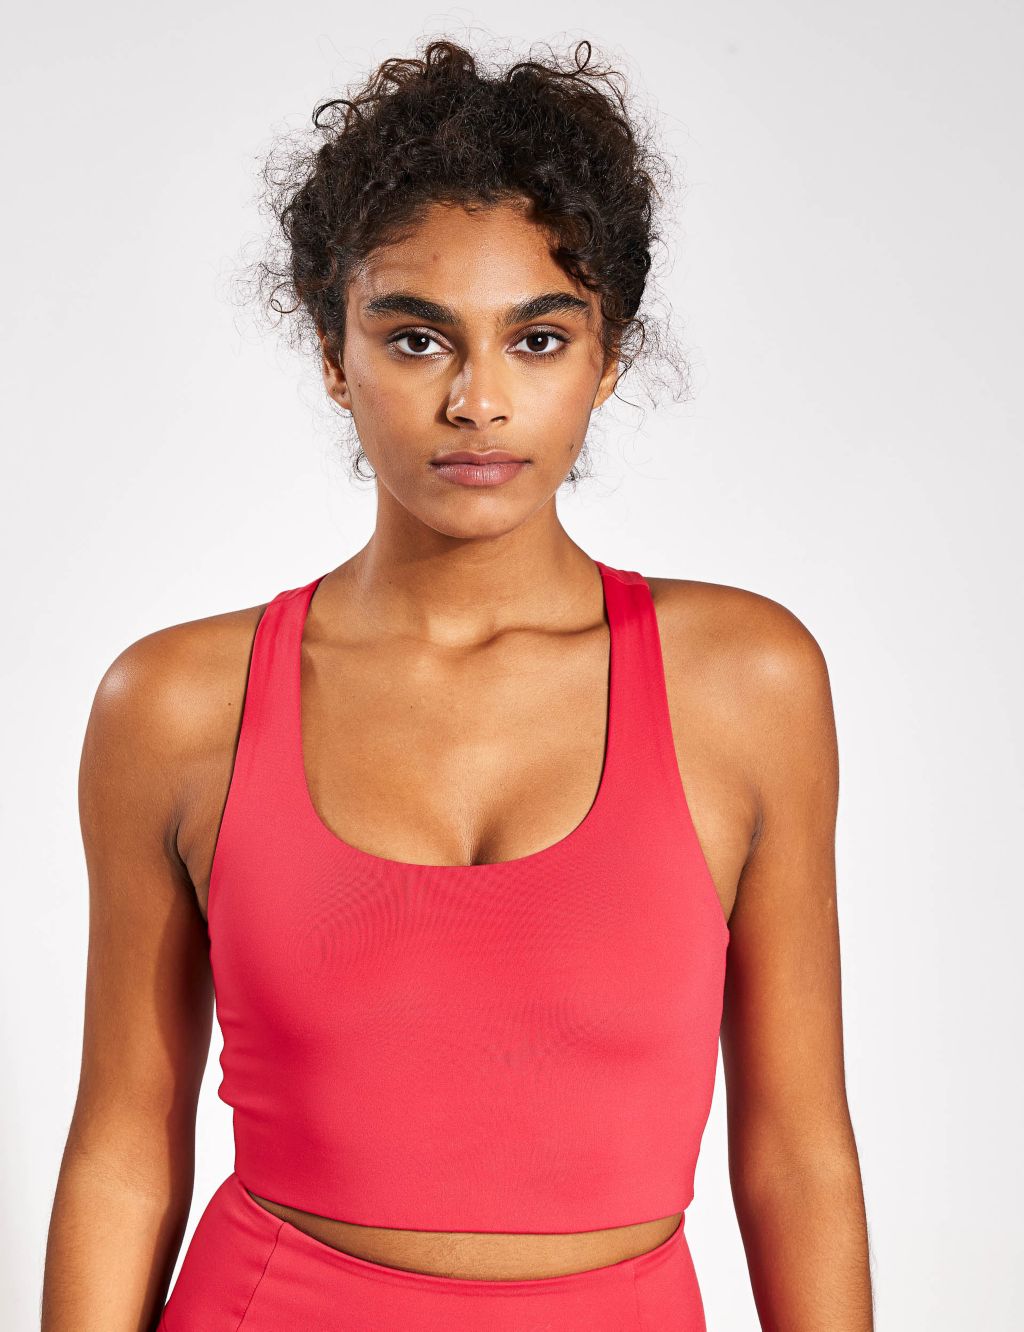  Women's Sports Bras - White / Women's Sports Bras / Women's Bras:  Clothing, Shoes & Jewelry